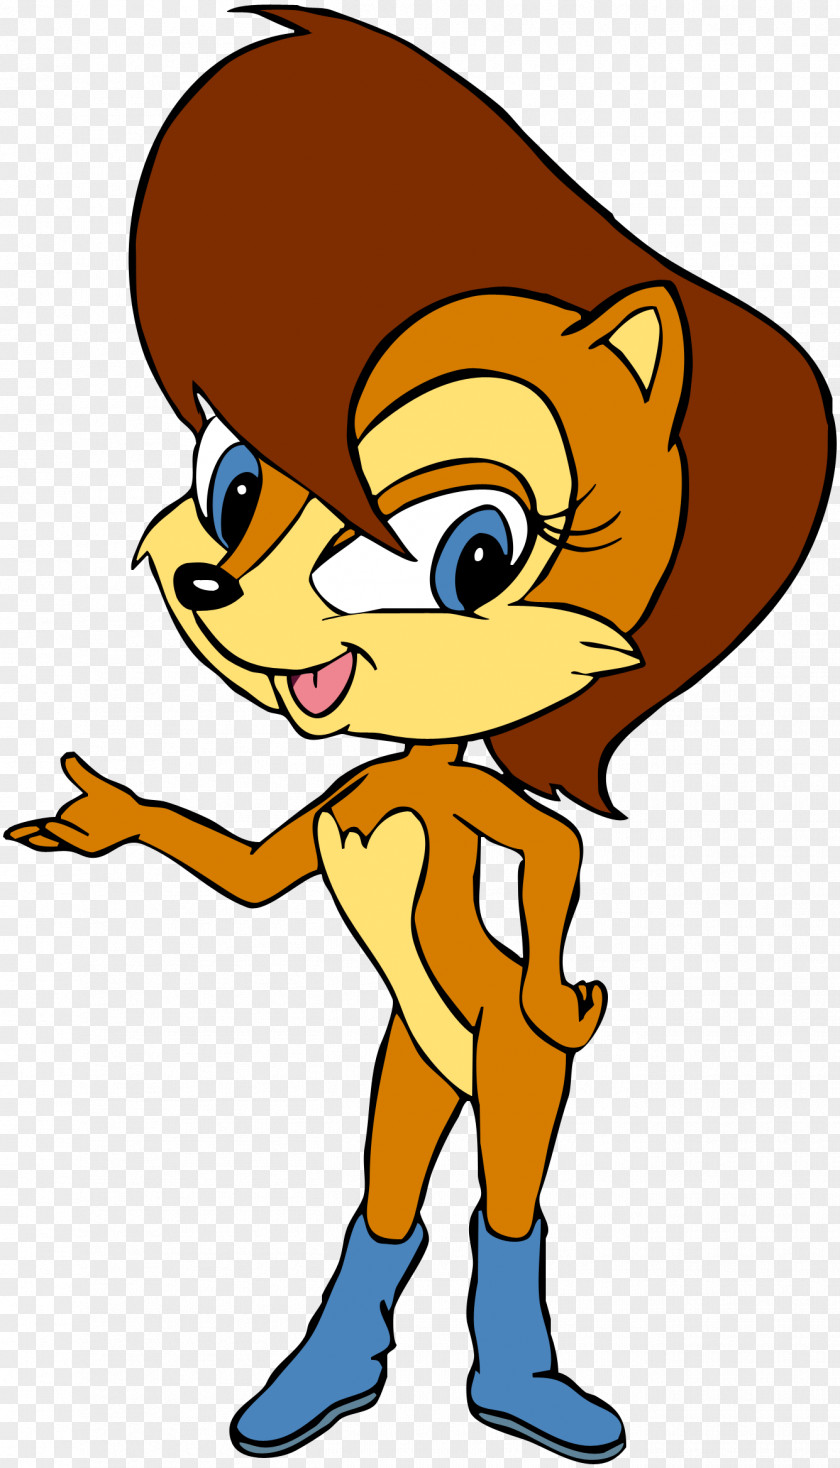 Acorn Sonic The Hedgehog Heroes Dash Knuckles Echidna Princess Sally PNG